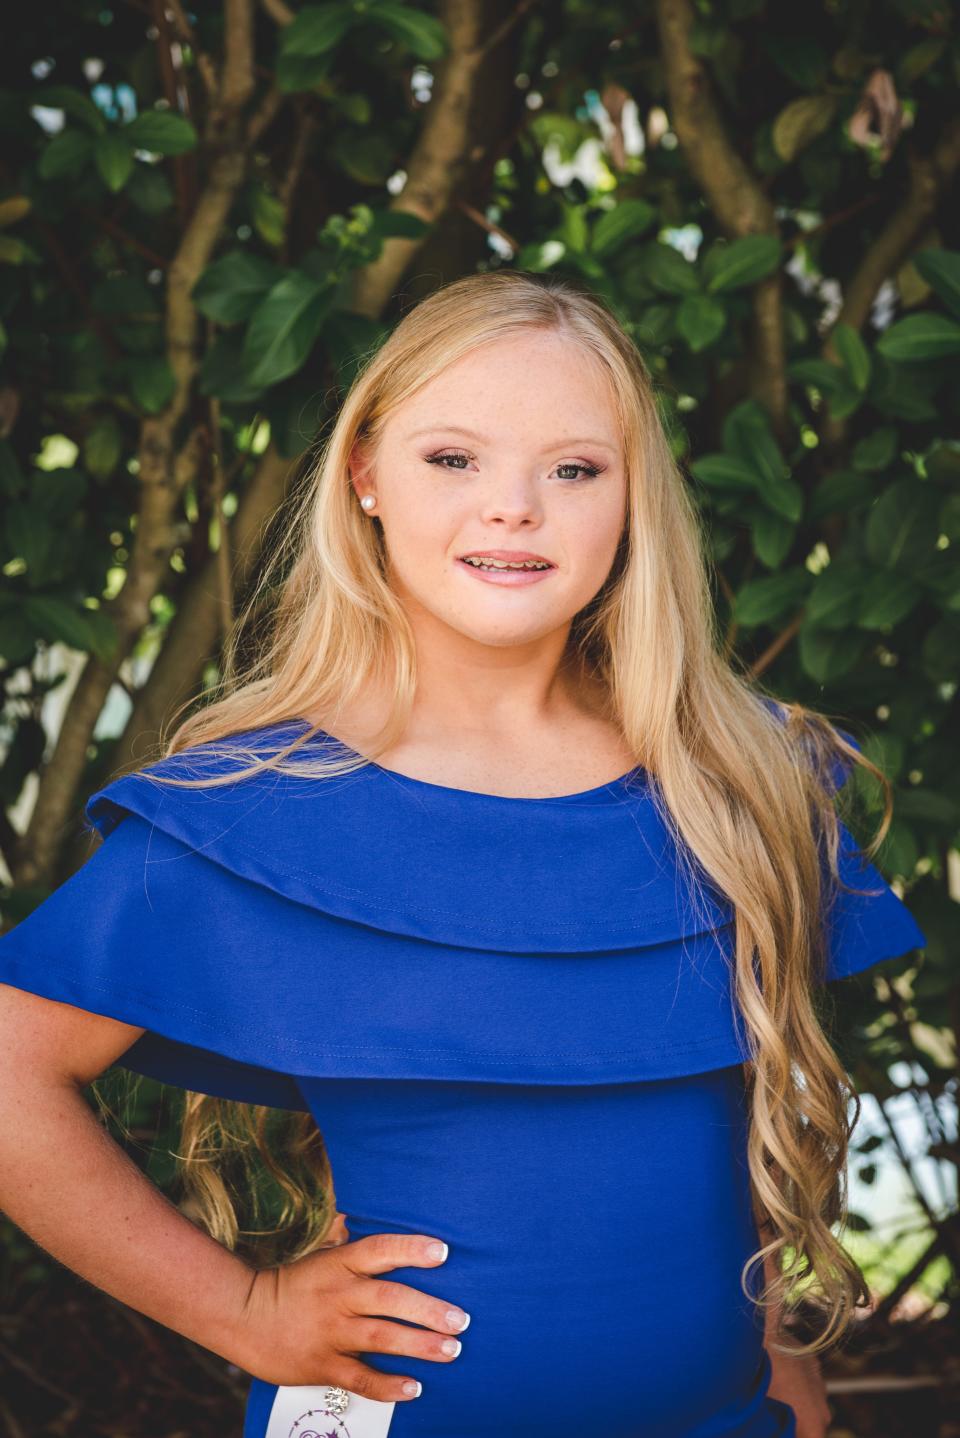 Kassie Mundhenk, a Kintnersville actress and model, hopes to inspire others with down syndrome to pursue their dreams. "The coolest thing about being on TV is getting to see myself doing it and show others they can do it, too," Mundhenk said.